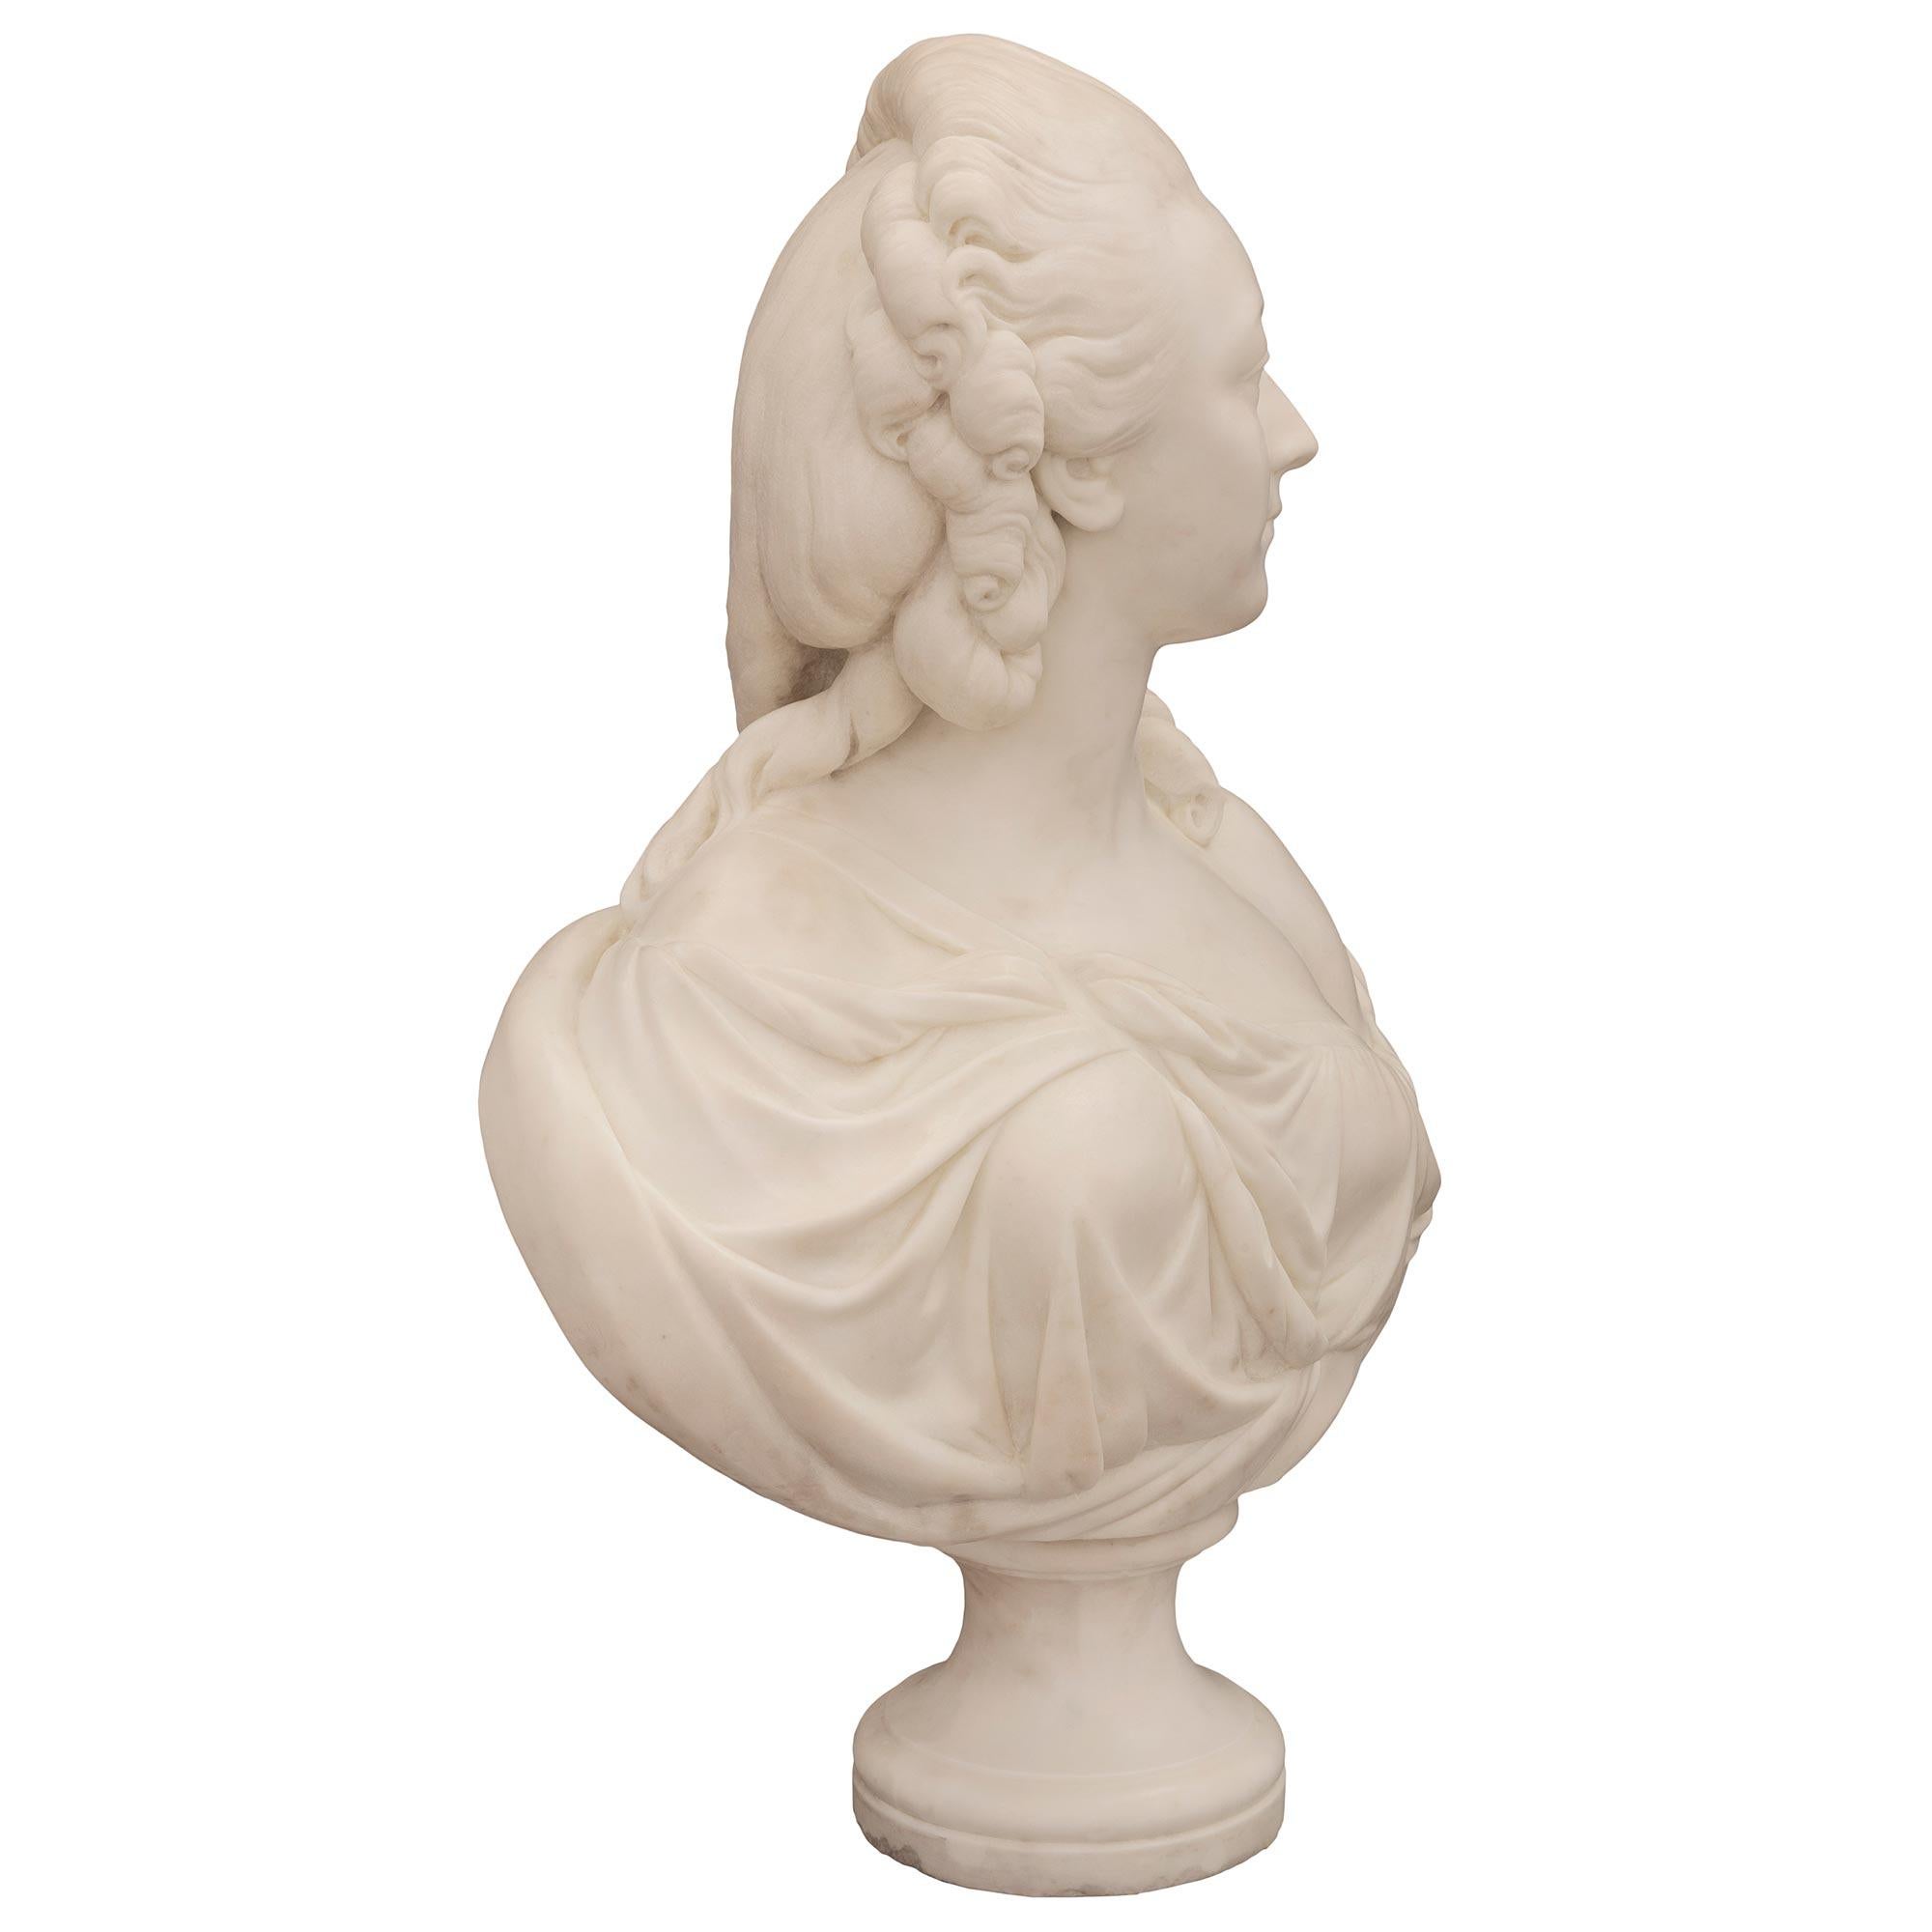 An elegant French 19th century white Carrara marble bust of La Comtesse Du Bary in the manner of Augustin Pajou. The bust is raised by a fine circular socle shaped pedestal support with a lovely mottled band. The Contesse is draped in classical